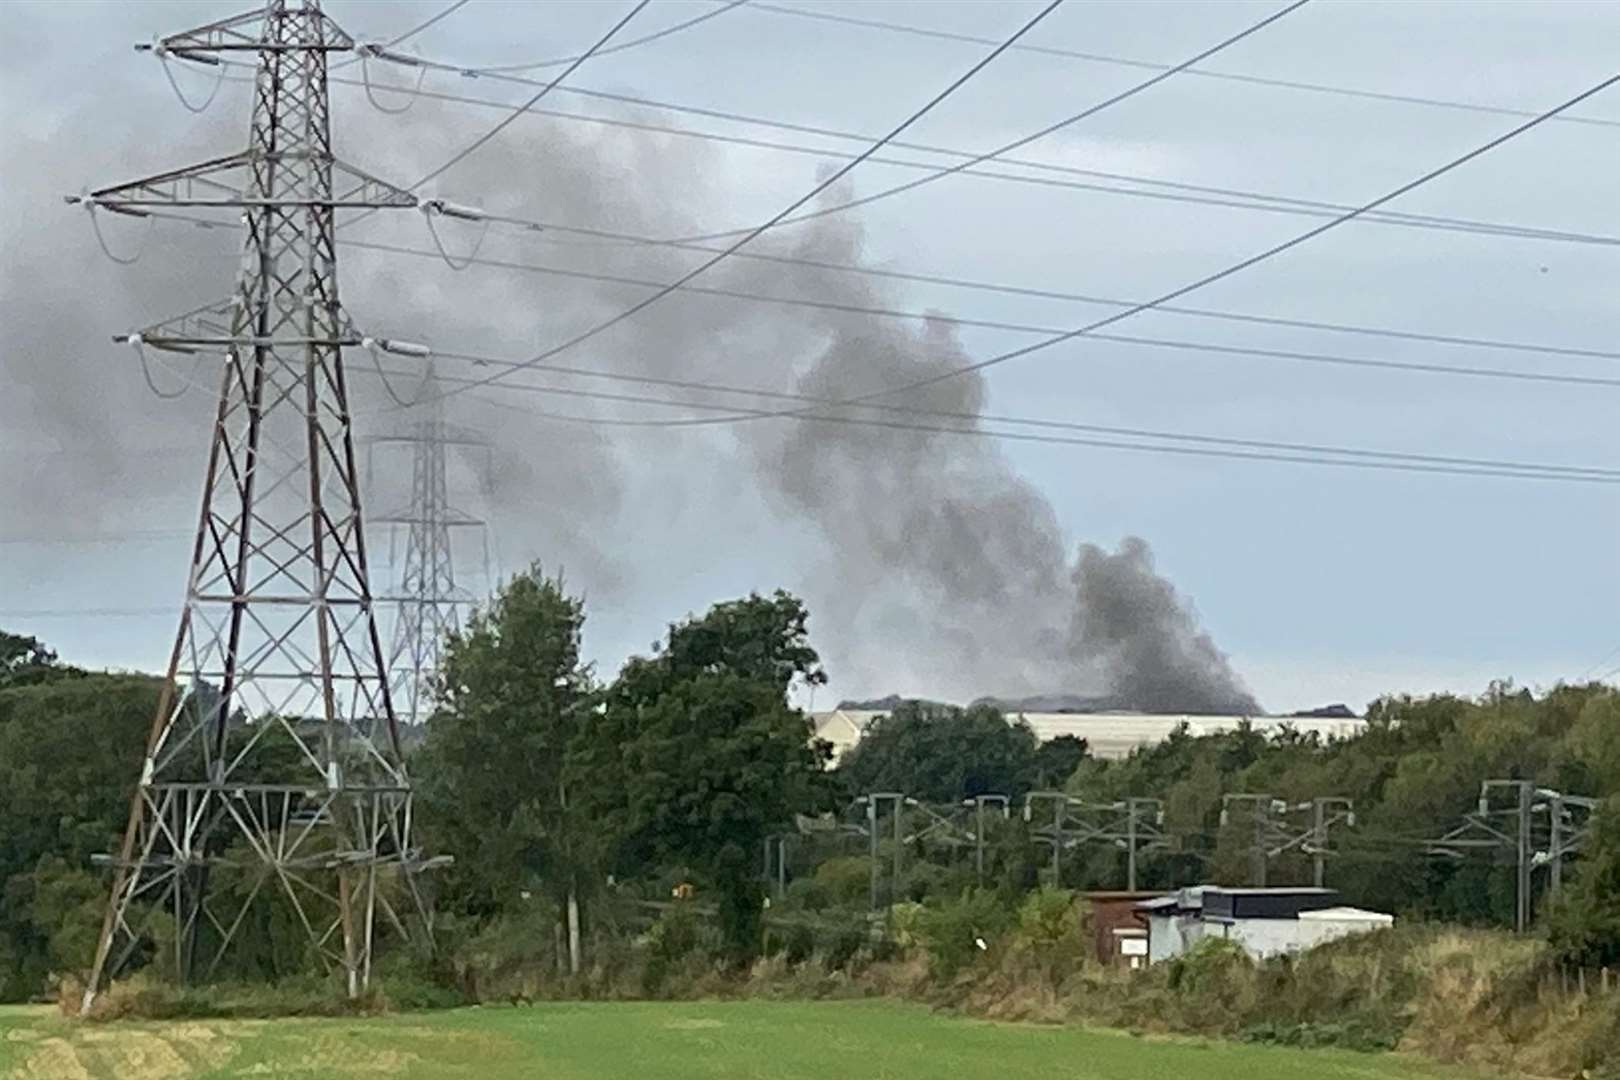 Smoke can be seen billowing from the site. Photo: Barry Goodwin